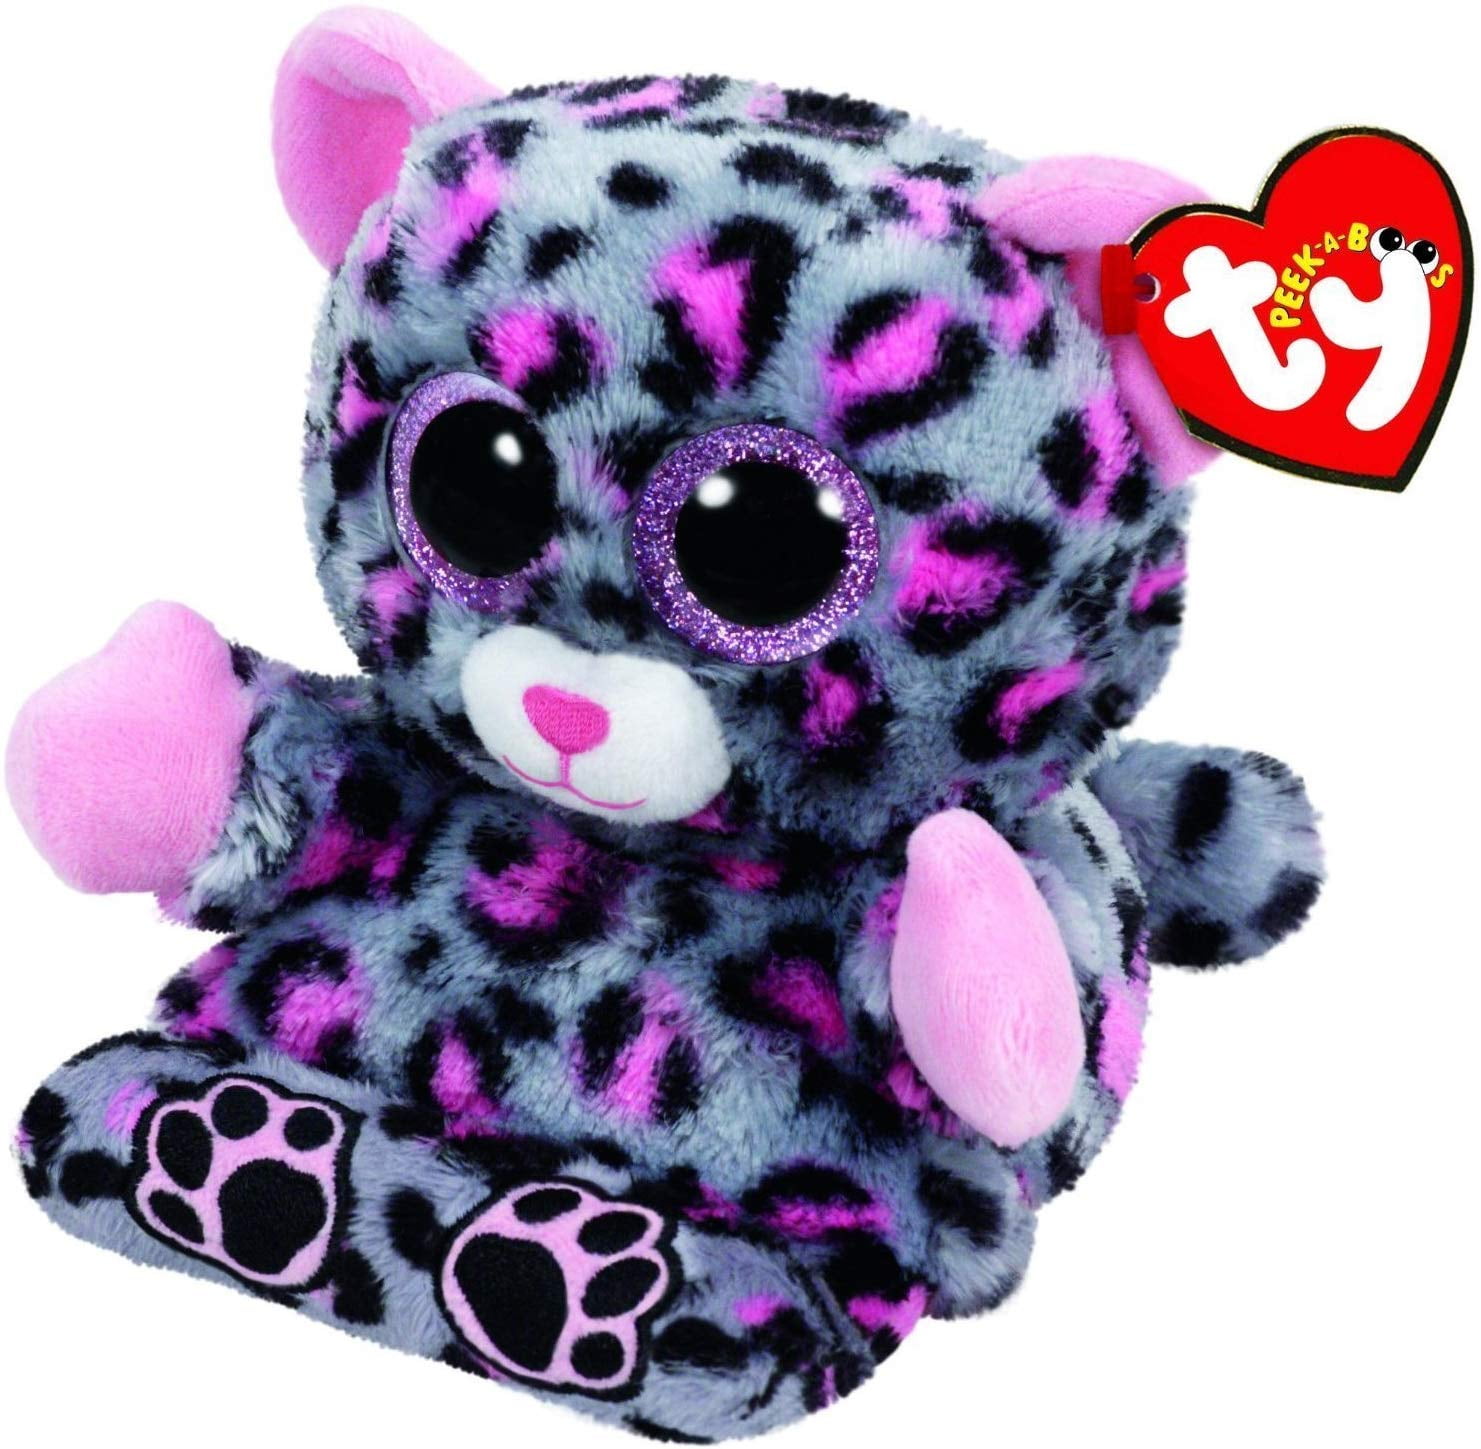 TY BEANIE PEEK A BOO SOFT TOY PLUSH SMART PHONE HOLDER WITH SCREEN CLEANER 